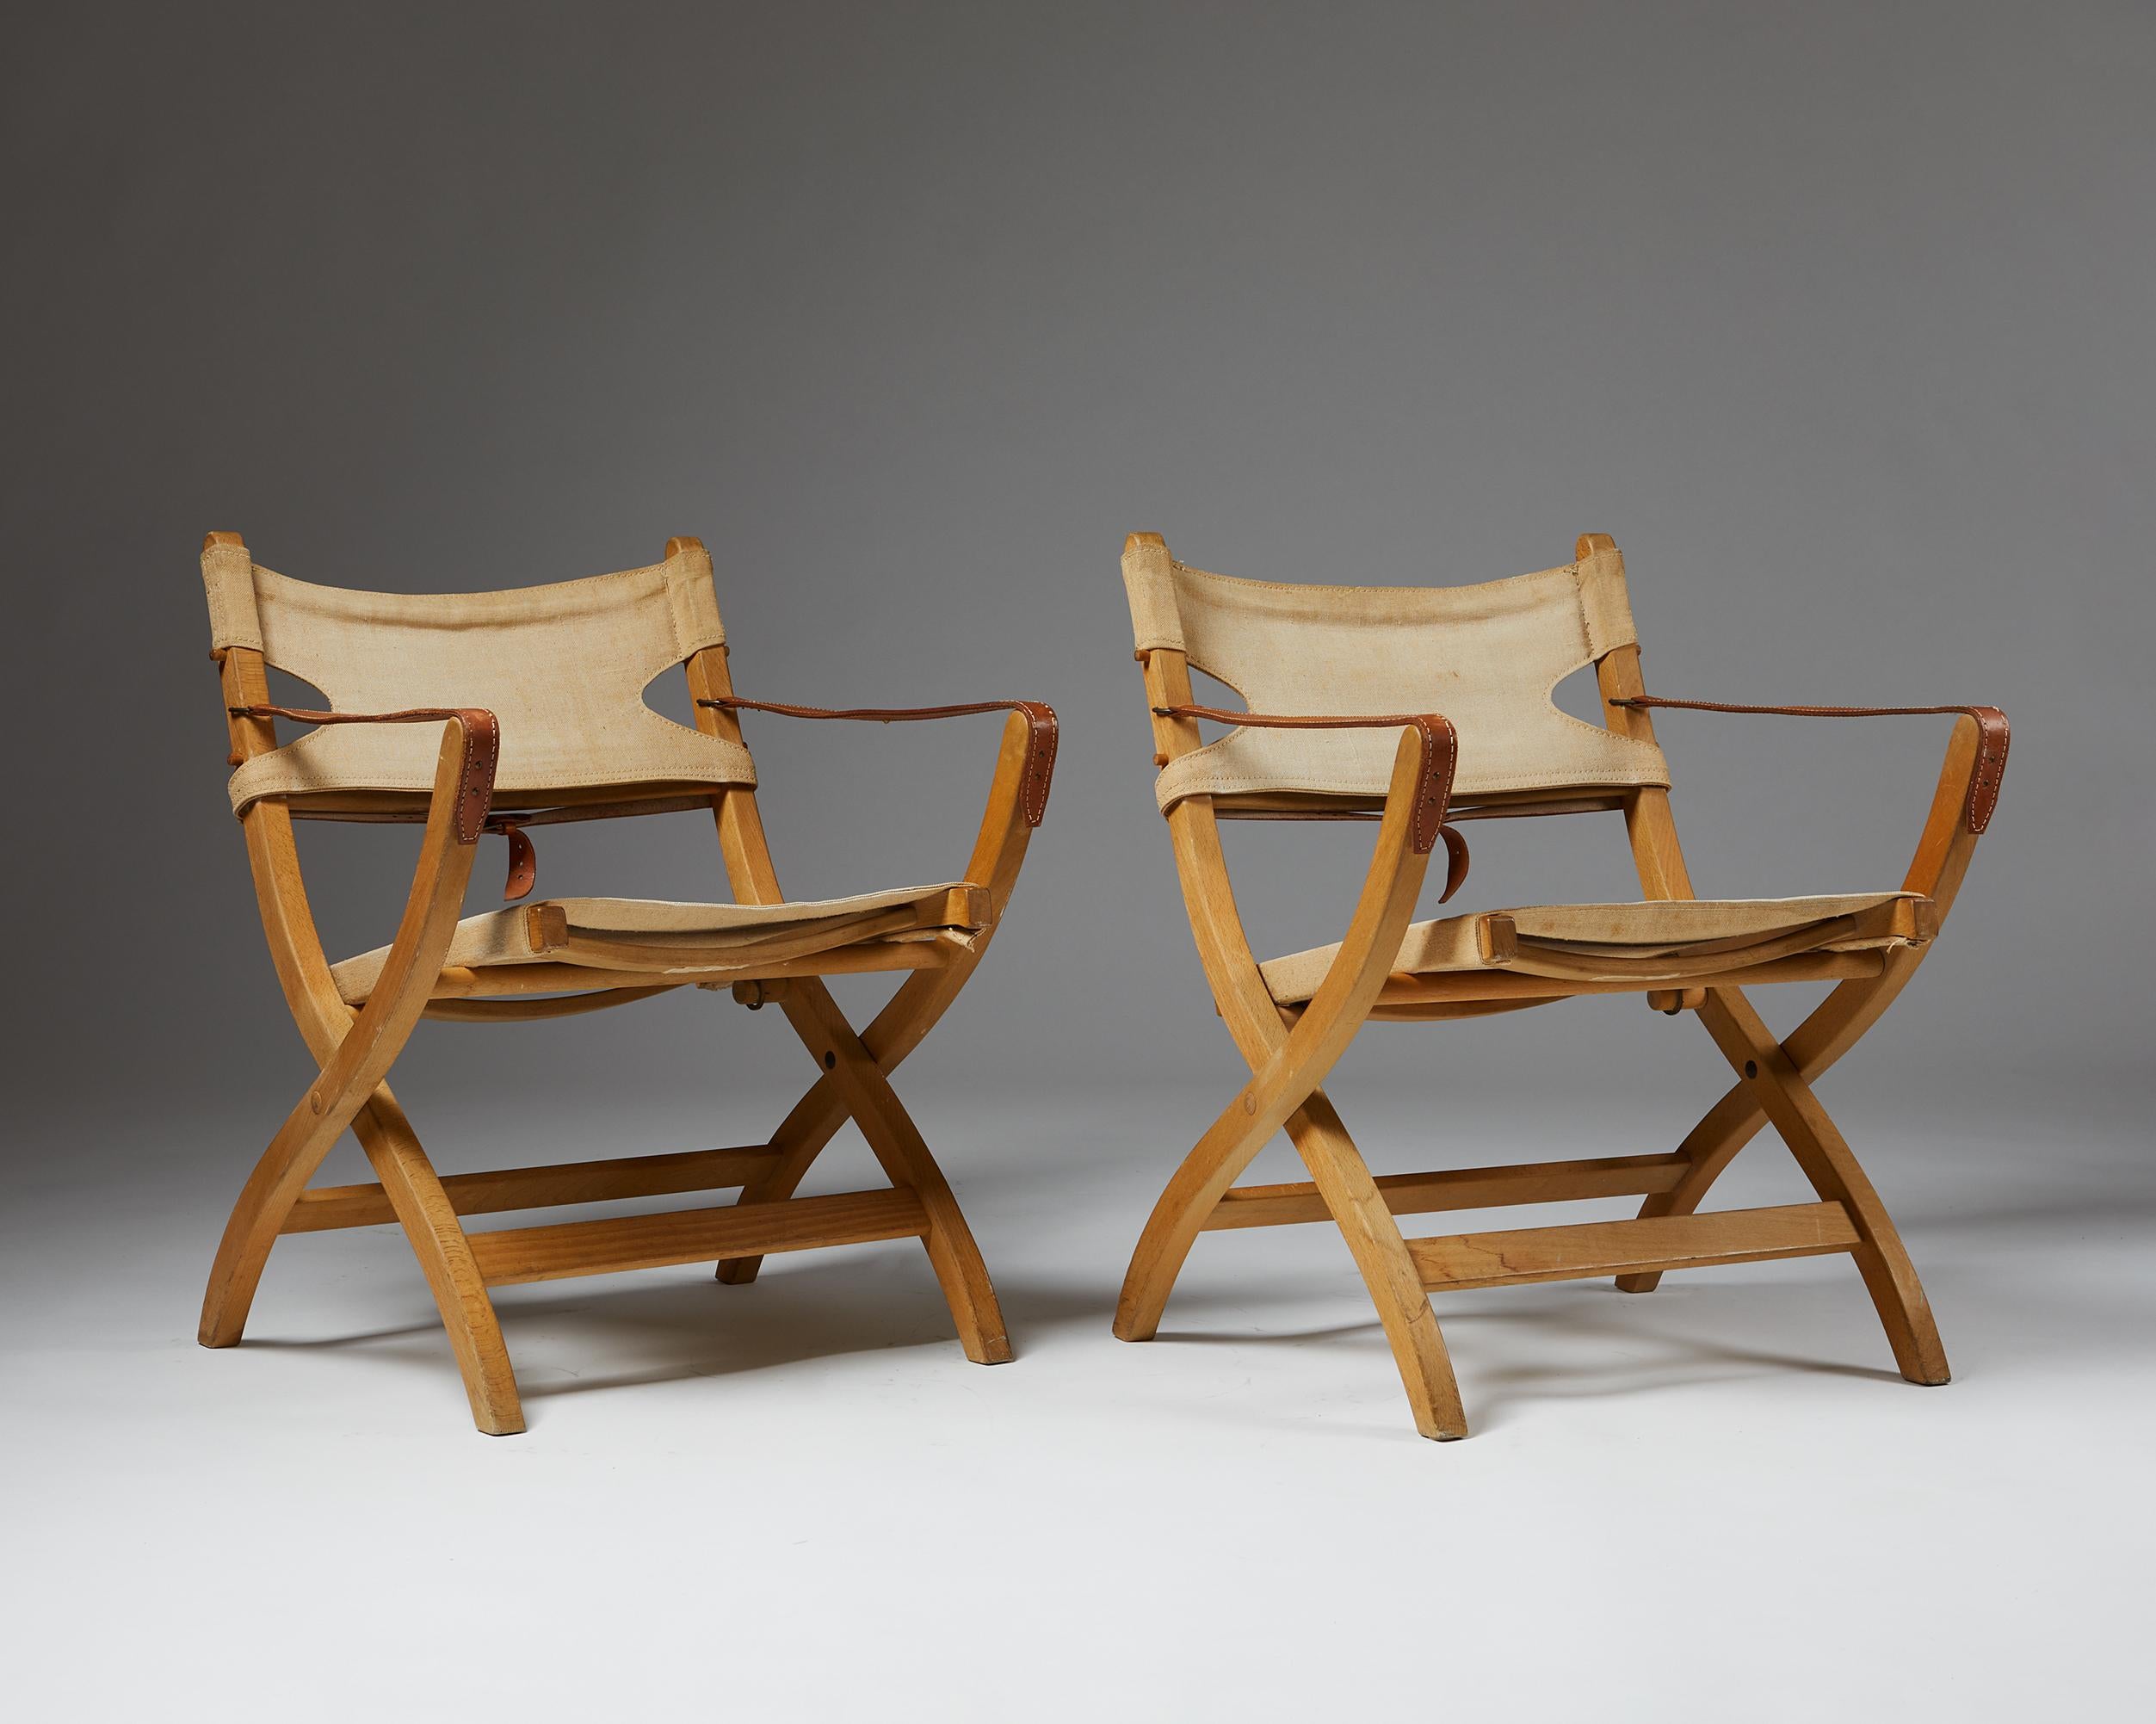 Danish Pair of Folding Chairs Designed by Poul Hundevad for Vamdrup